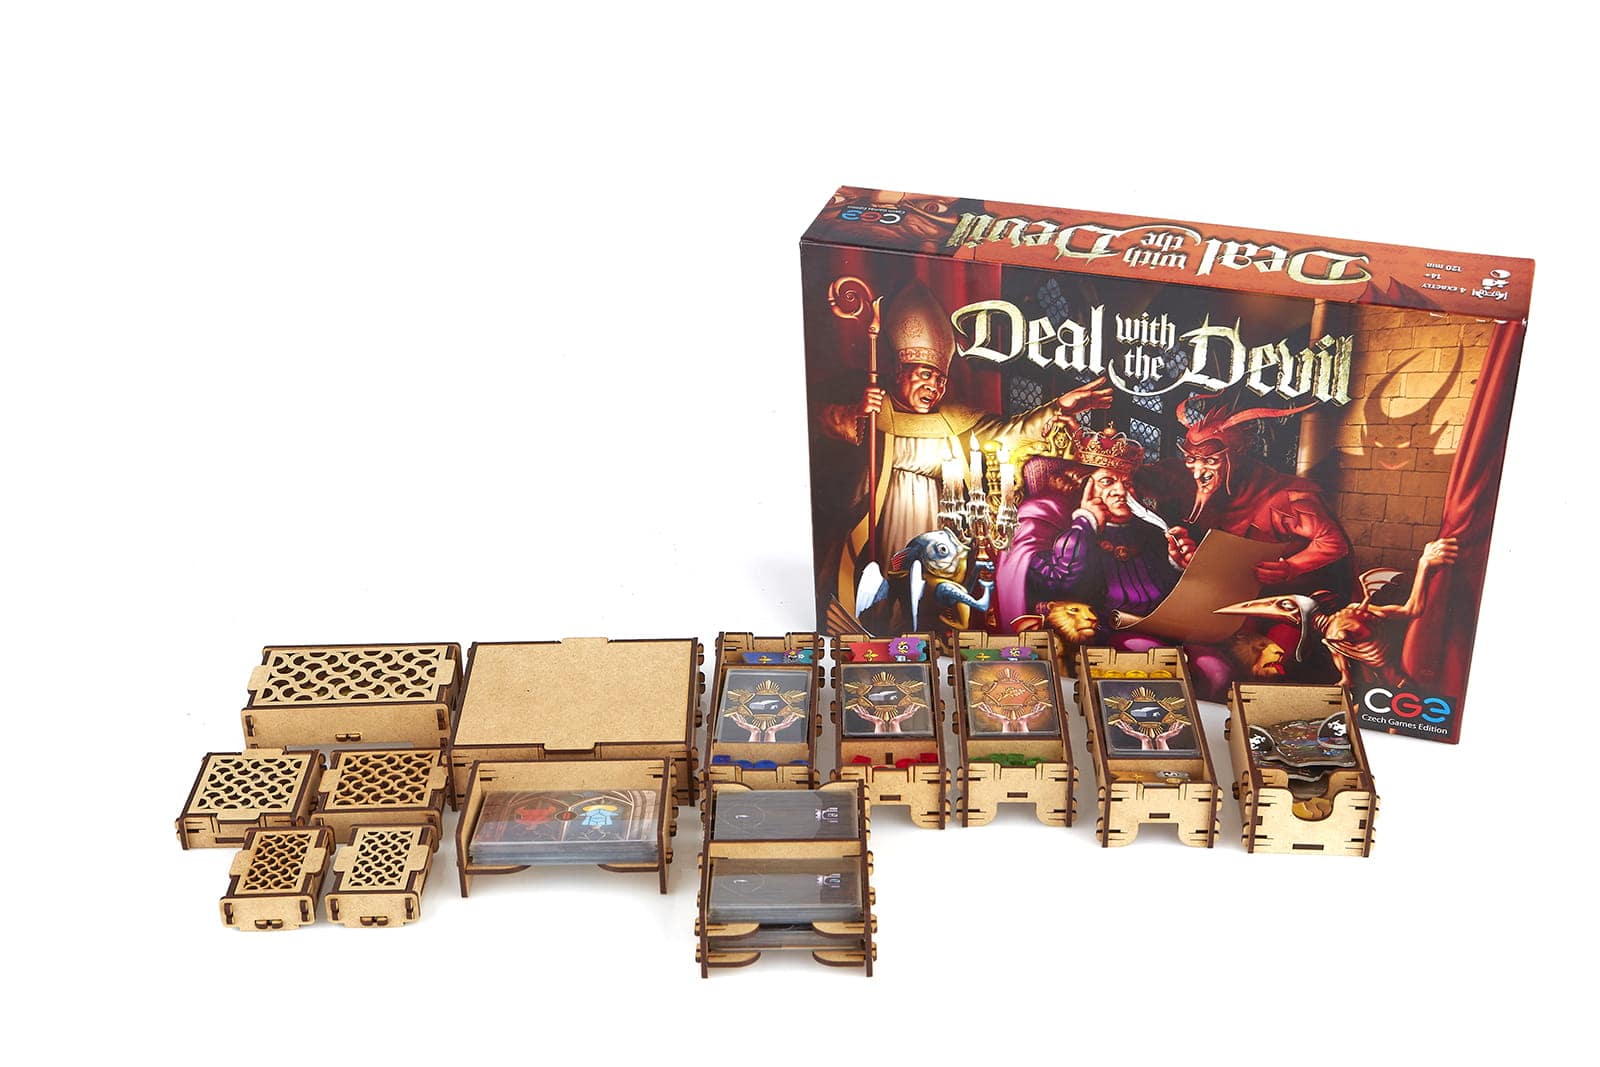 Poland Games Insert: Deal with the Devil